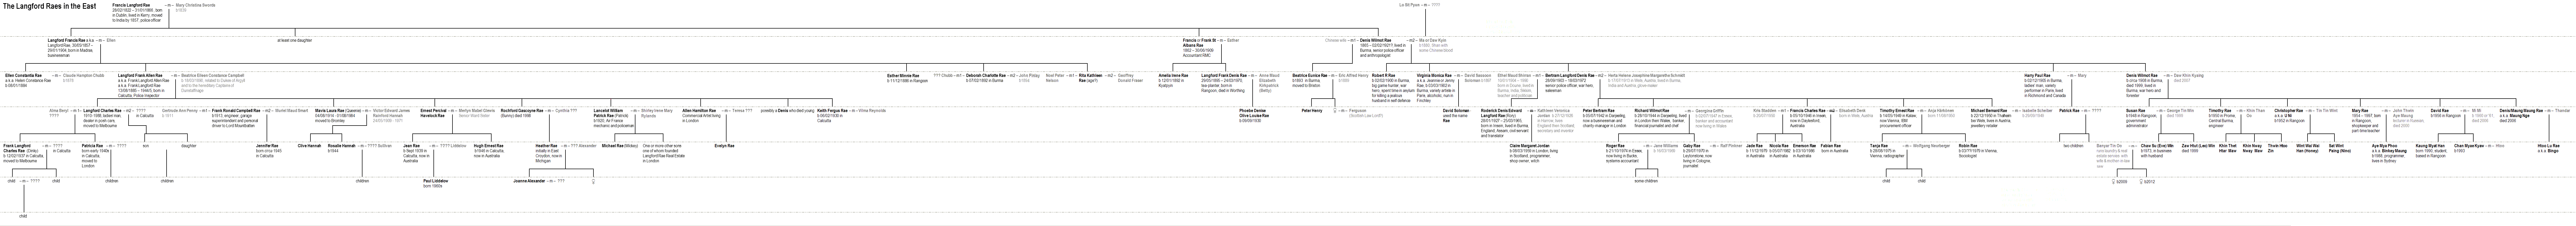 family tree drawn up using Excel